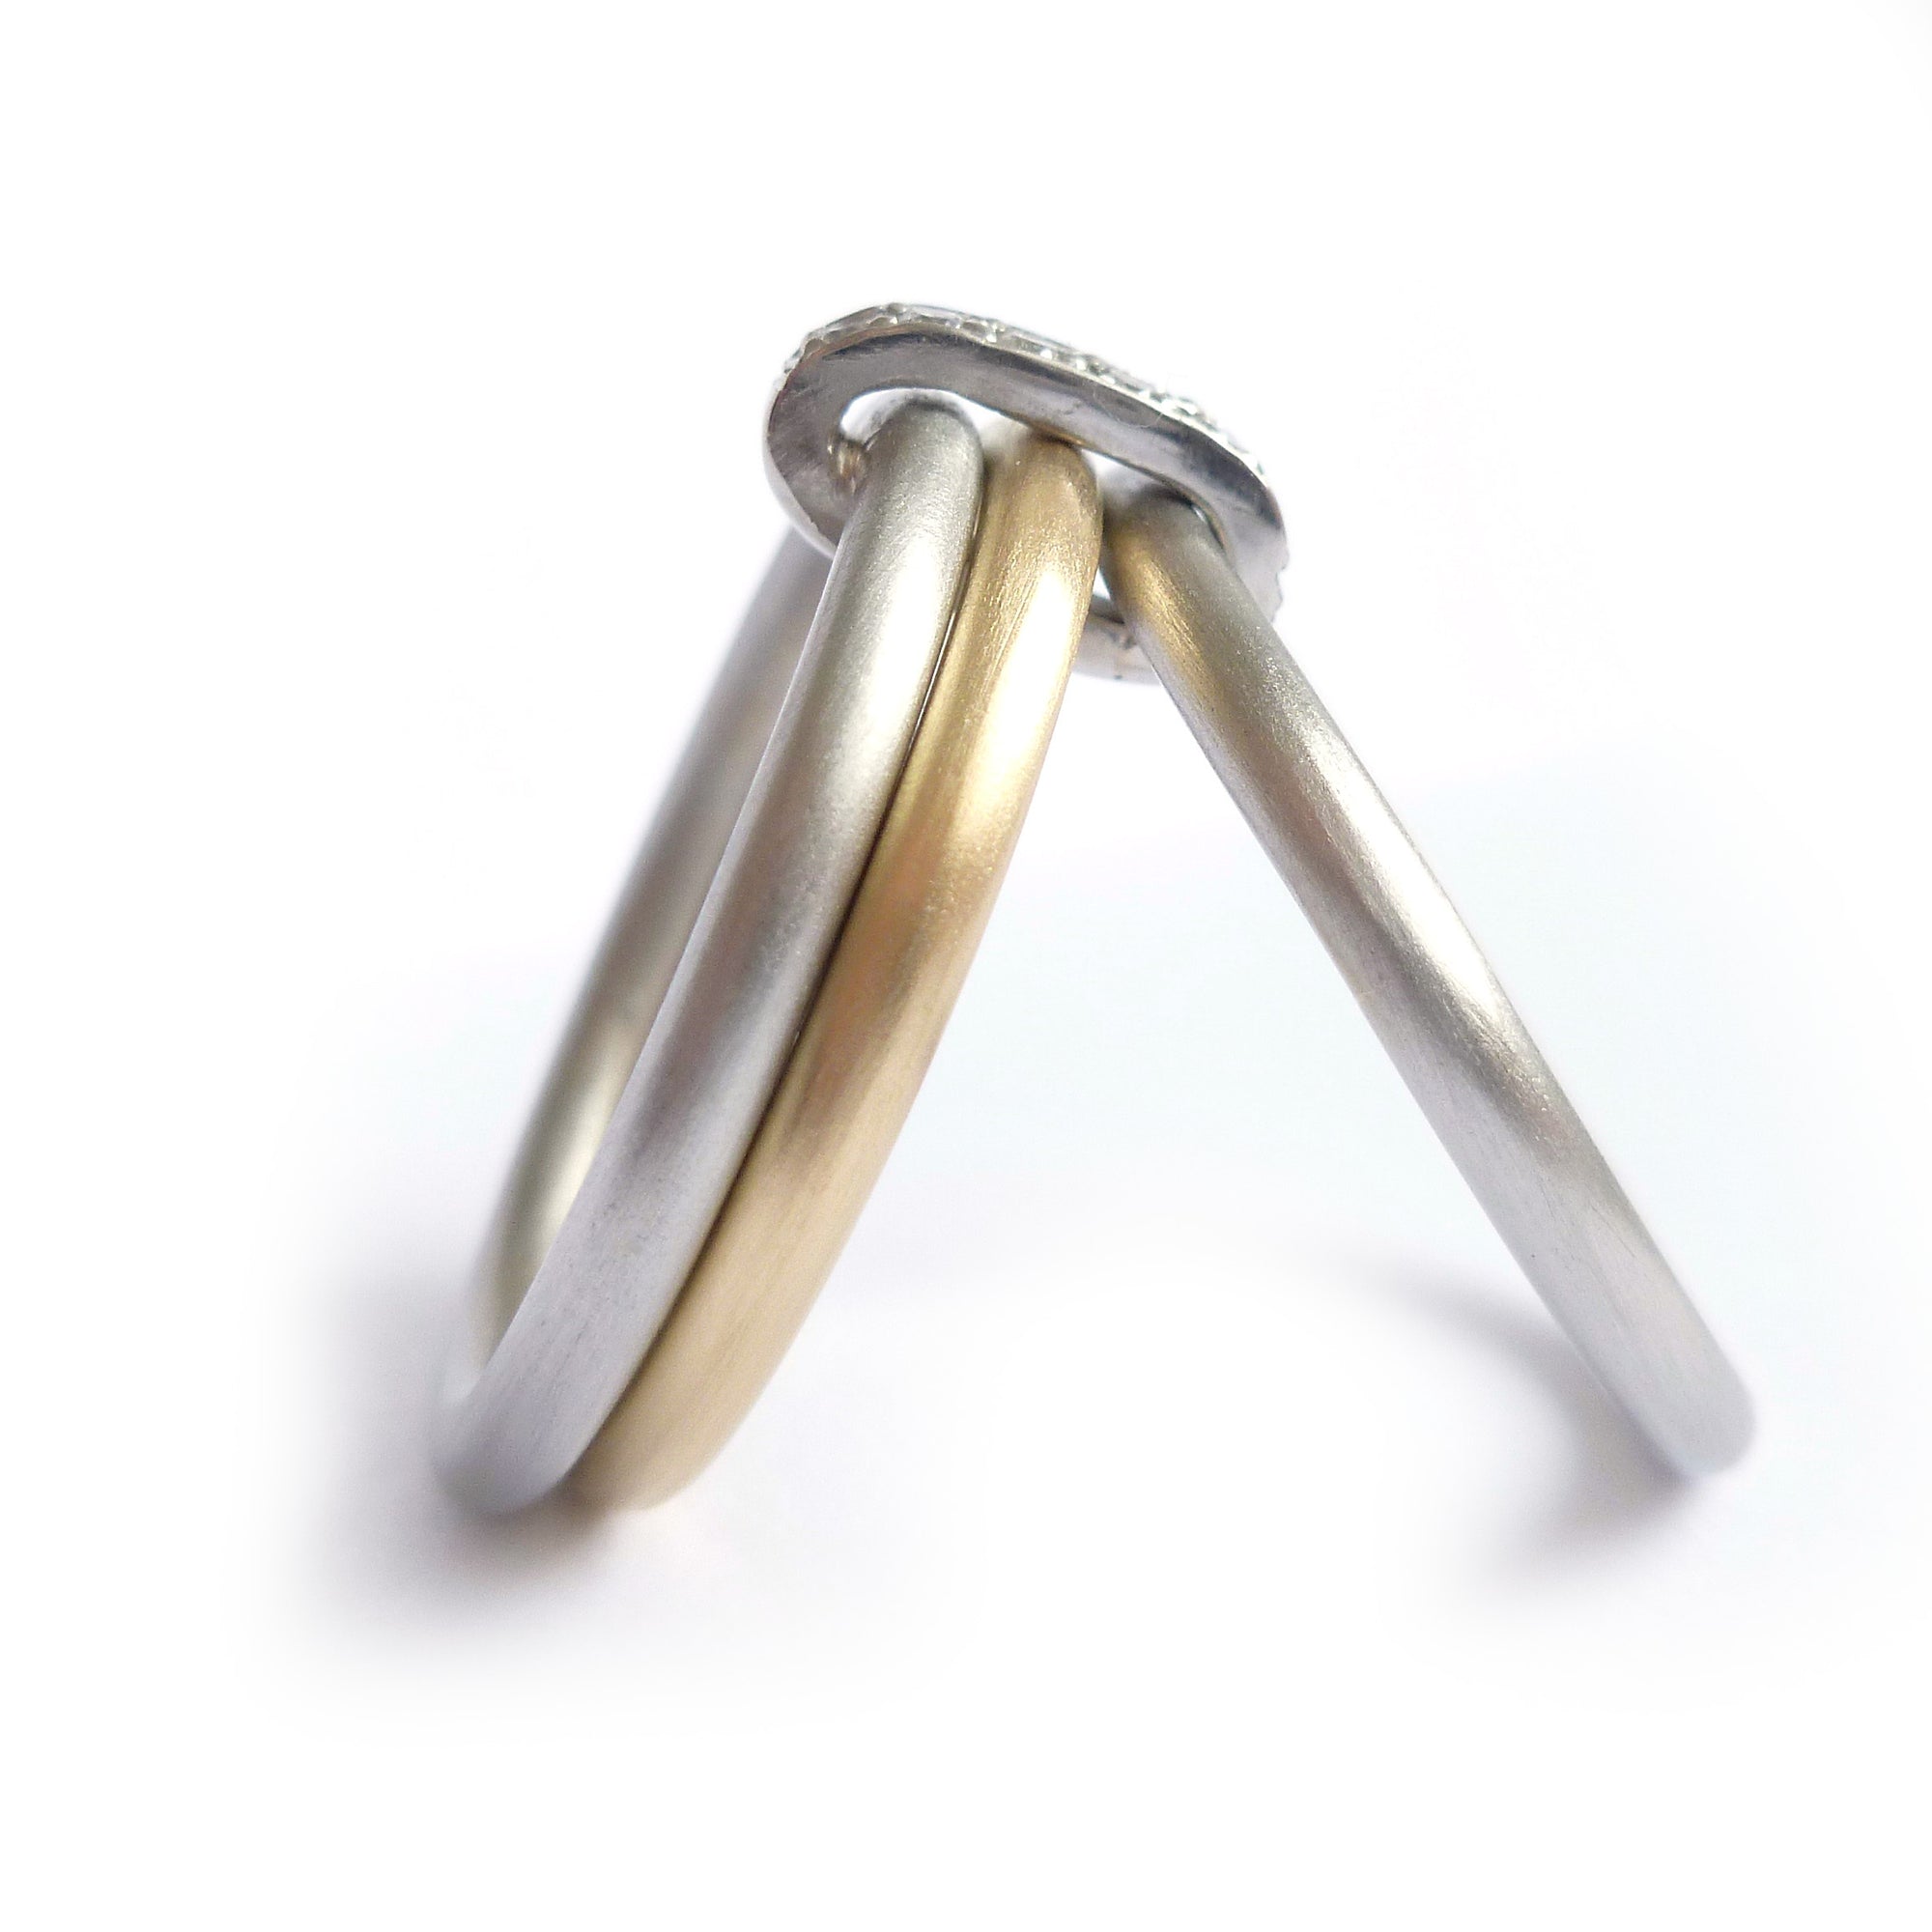 Handmade three band ring, joined together with a band of diamonds handmade by Sue Lane UK - gold platinum. Multi band ring or interlocking ring, sometimes called triple band rings too.